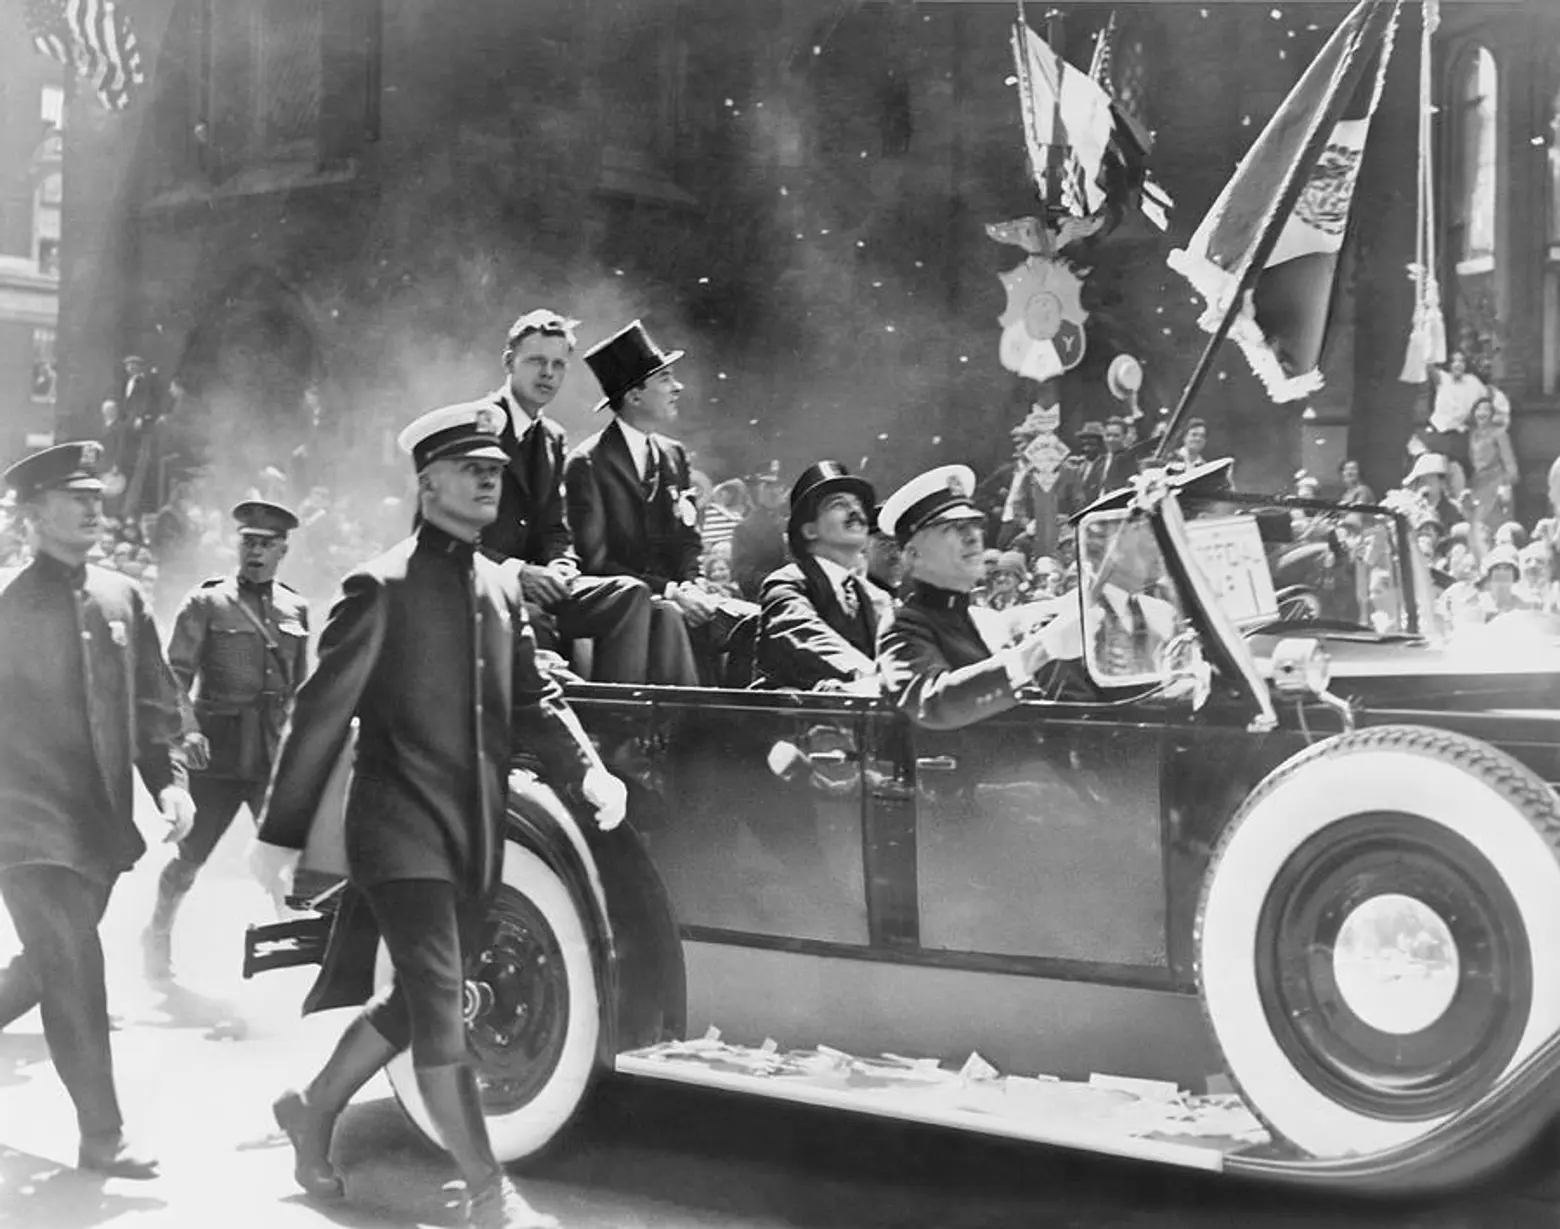 90 years ago, Charles Lindbergh received a ticker-tape parade in NYC